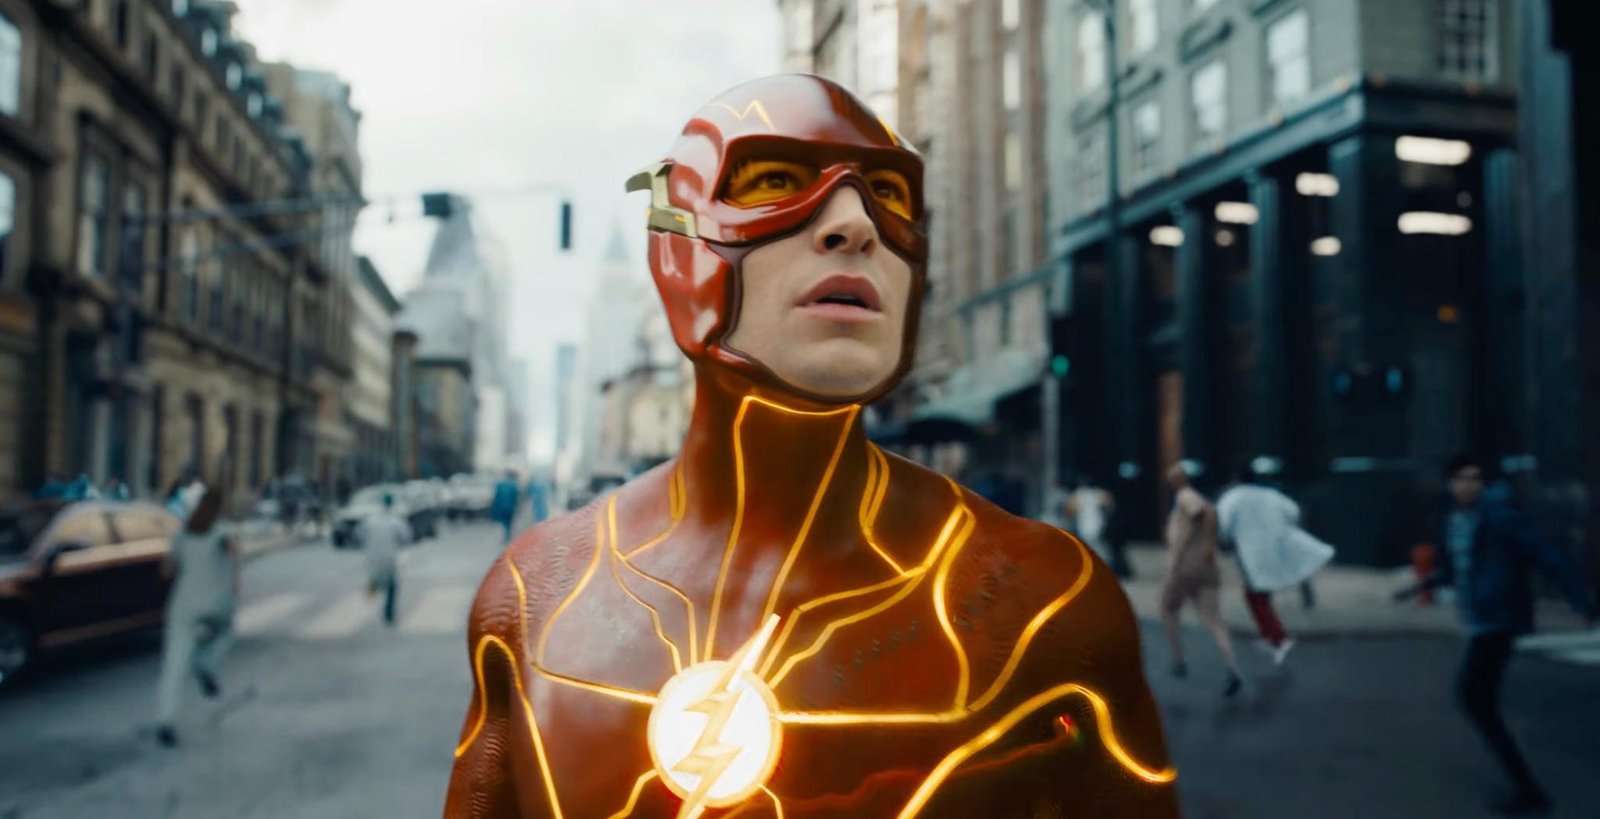 Ezra Milelr acts as The Flash in "Justice League"